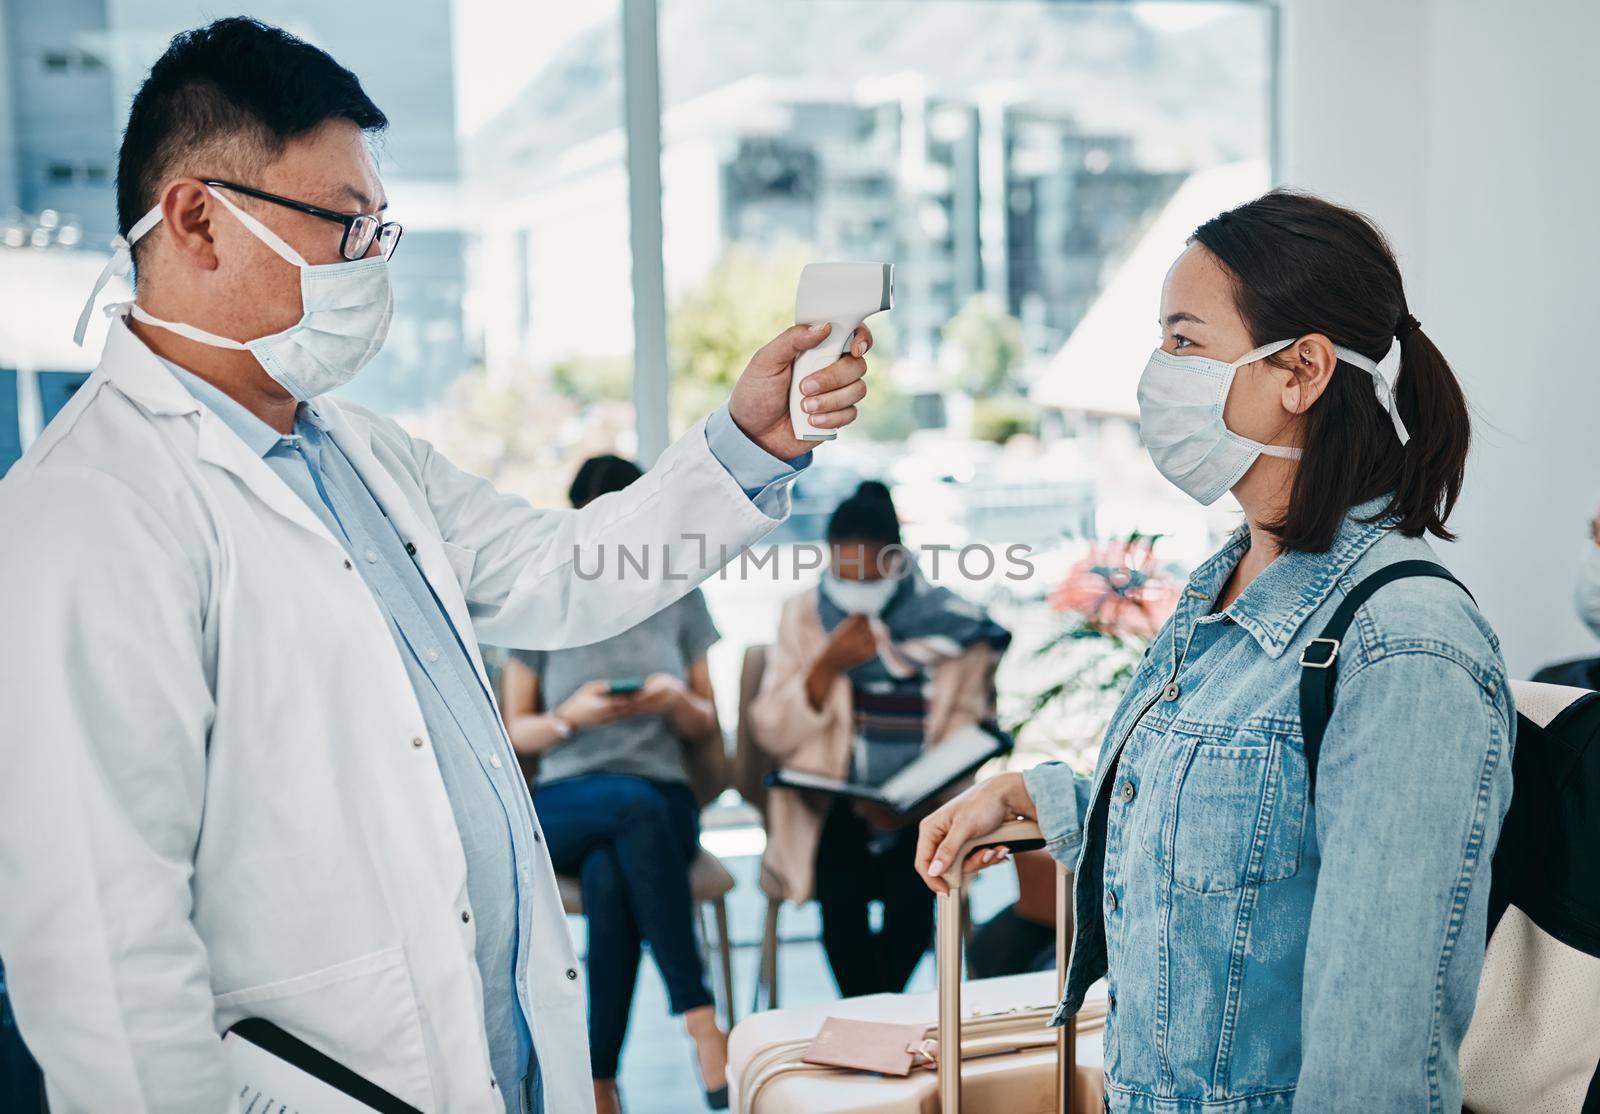 Covid traveling with a doctor taking temperature of a woman wearing a mask in an airport for safety in a pandemic. Healthcare professional with an infrared thermometer following travel protocol.